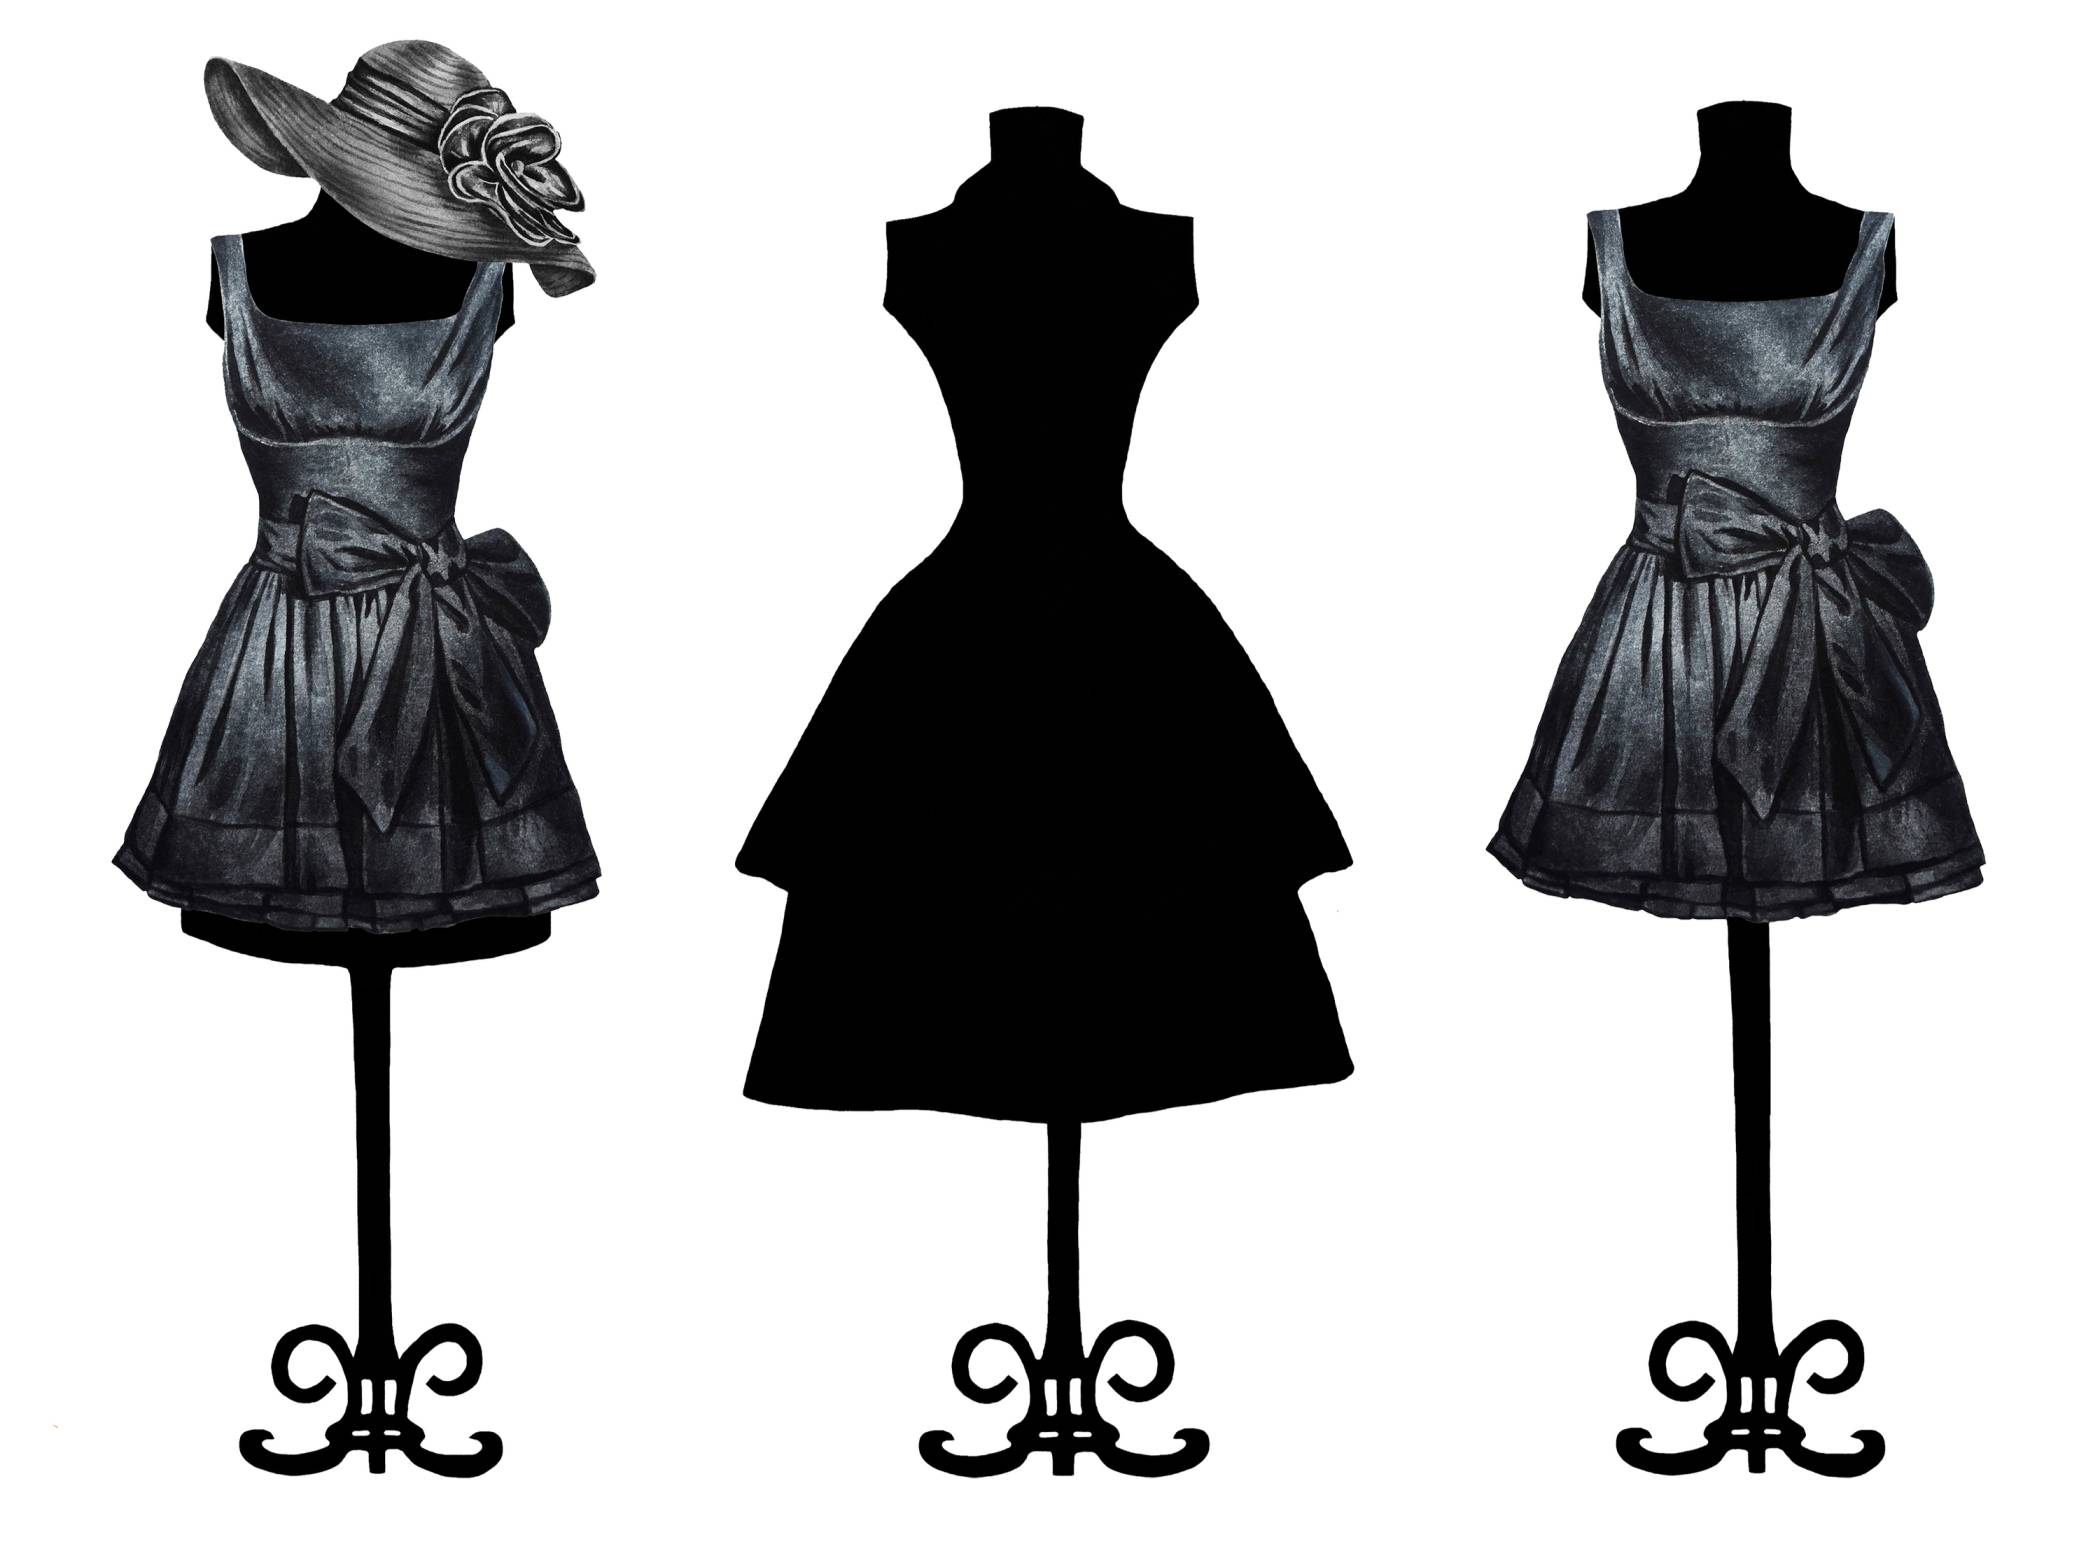 Dress Forms Types & Styles You Should Consider - Dress Forms USA